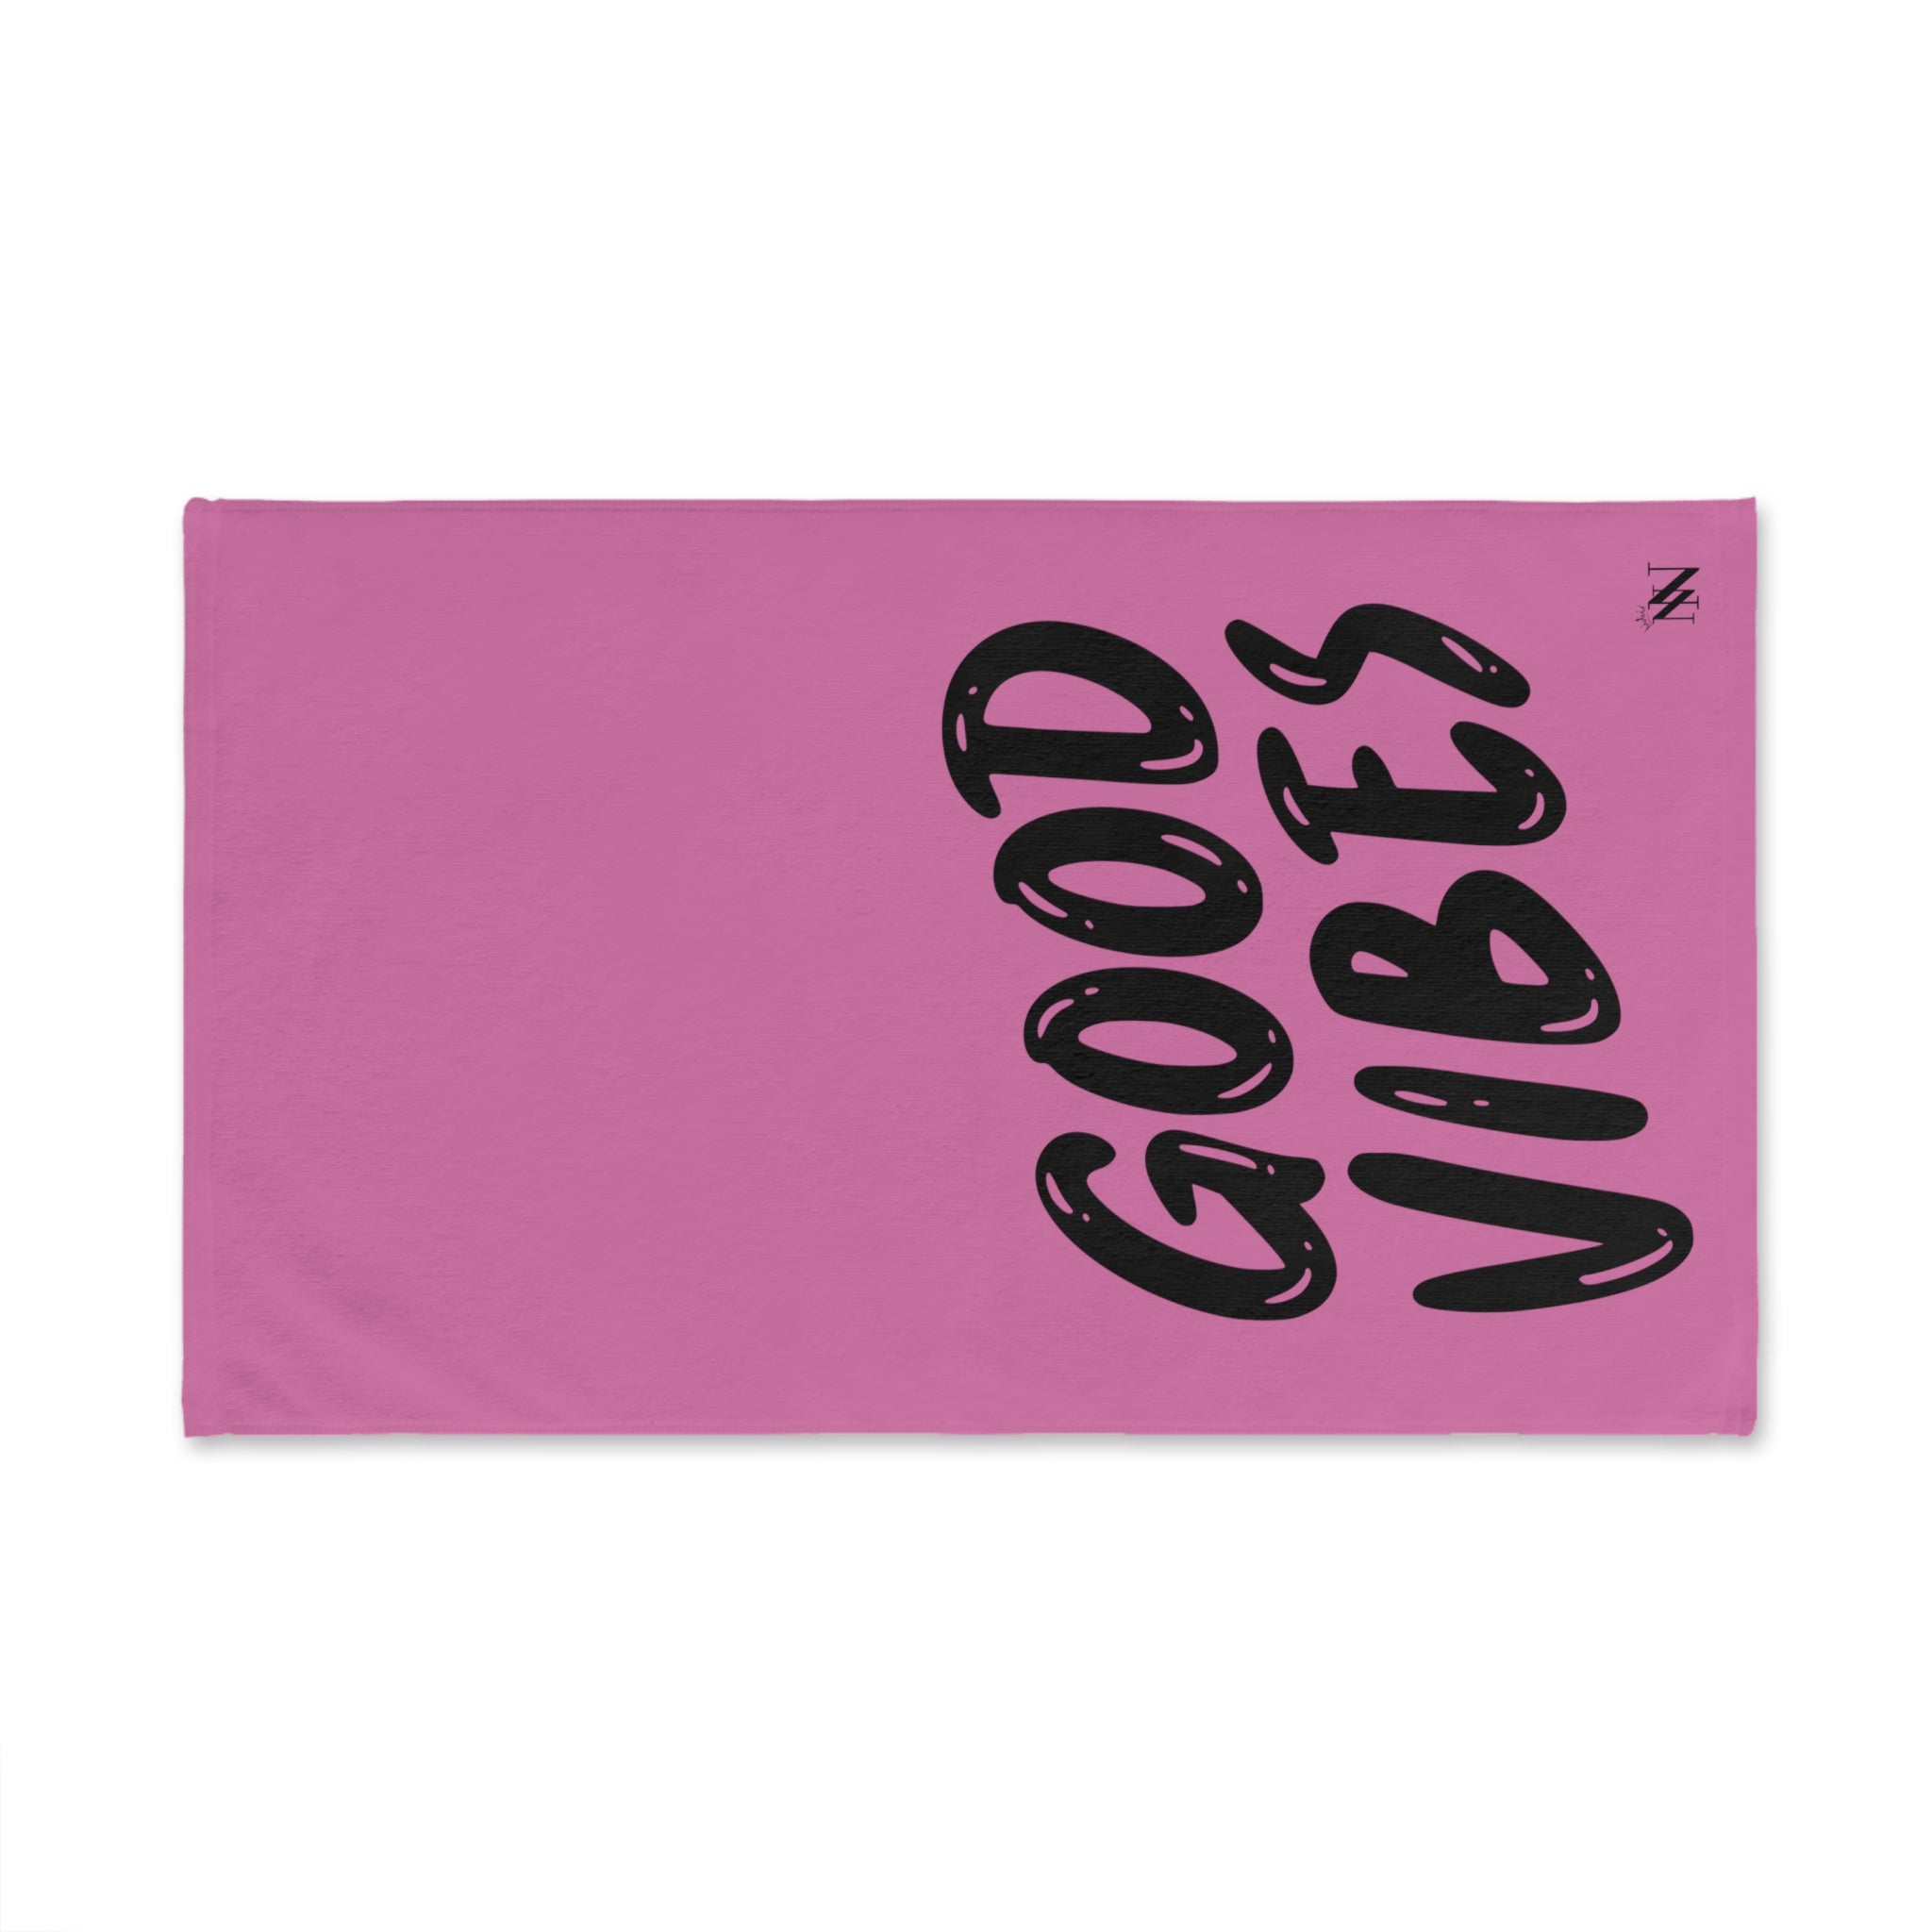 Good Vibes Bubble Pink | Novelty Gifts for Boyfriend, Funny Towel Romantic Gift for Wedding Couple Fiance First Year Anniversary Valentines, Party Gag Gifts, Joke Humor Cloth for Husband Men BF NECTAR NAPKINS